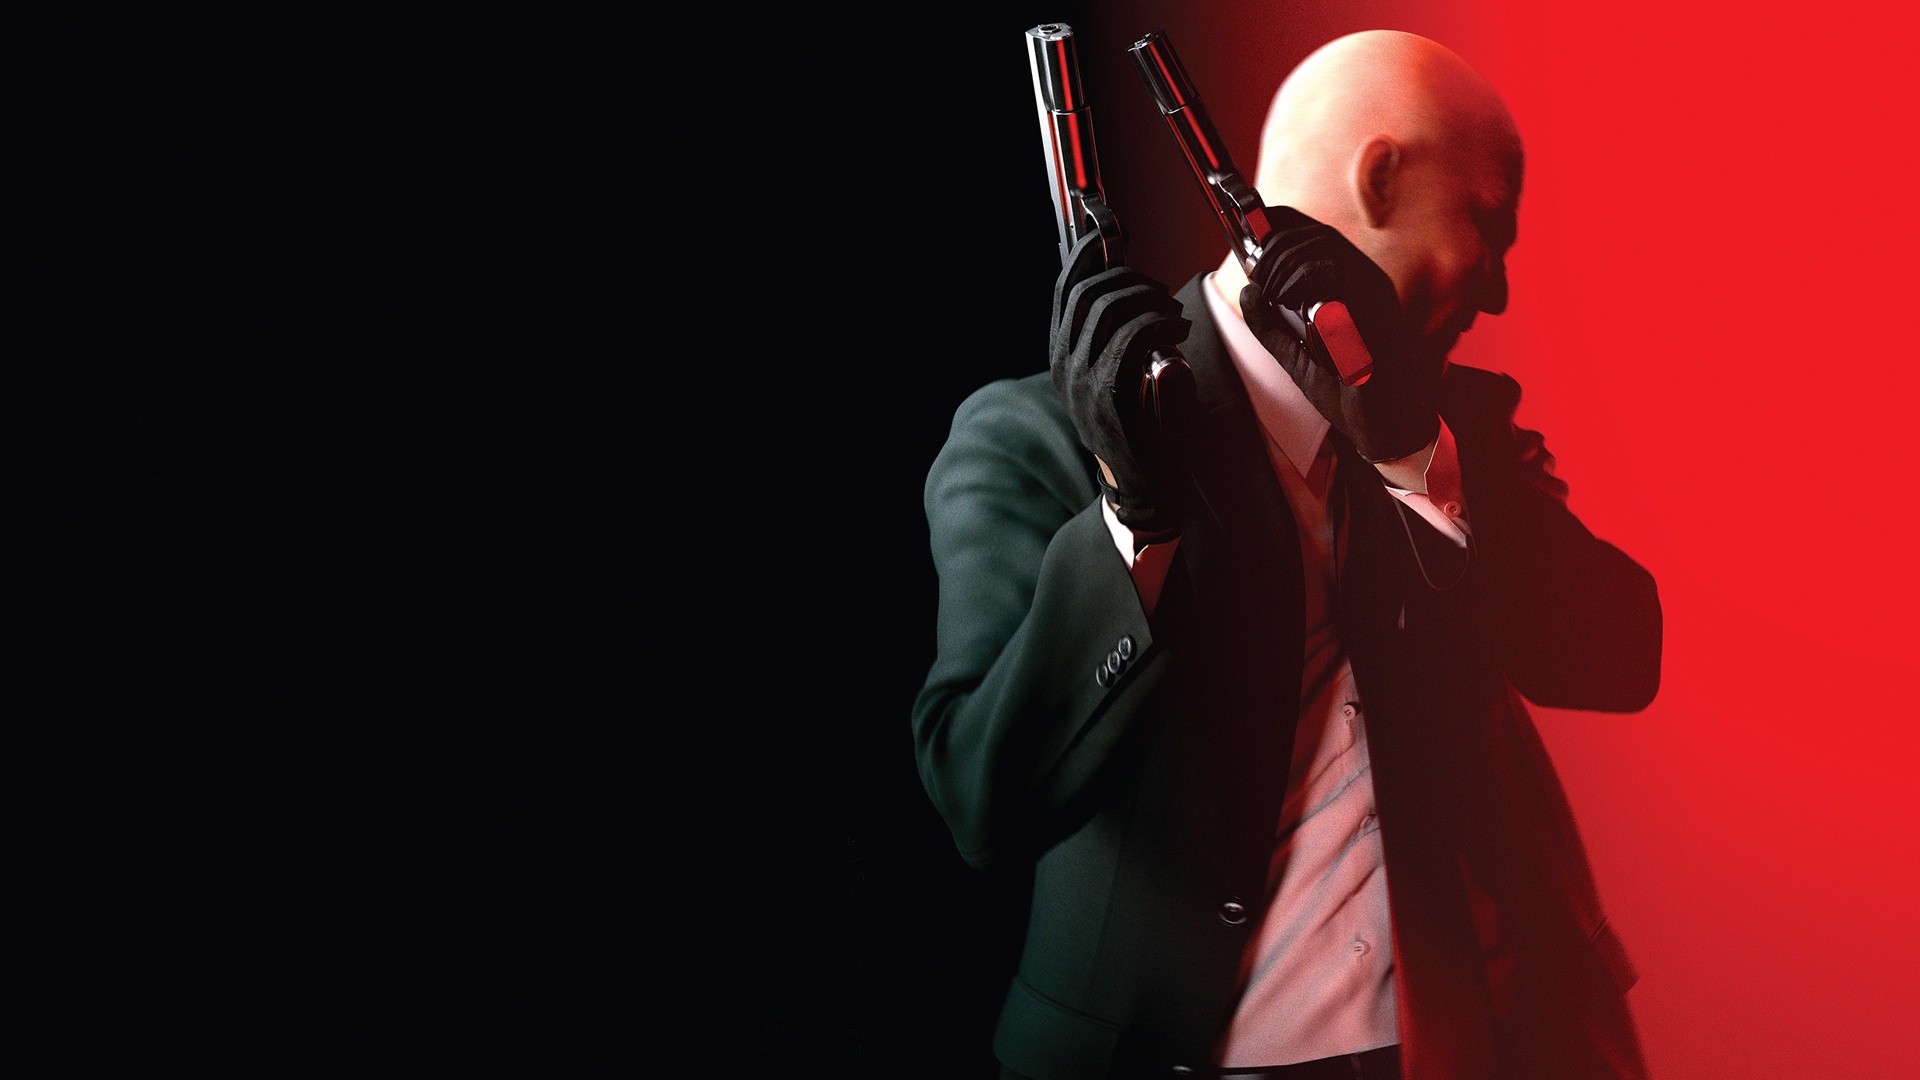 IO Interactive Reveals Details on Next-Gen “Hitman” Title - Promises a Return to Open-World Freedom